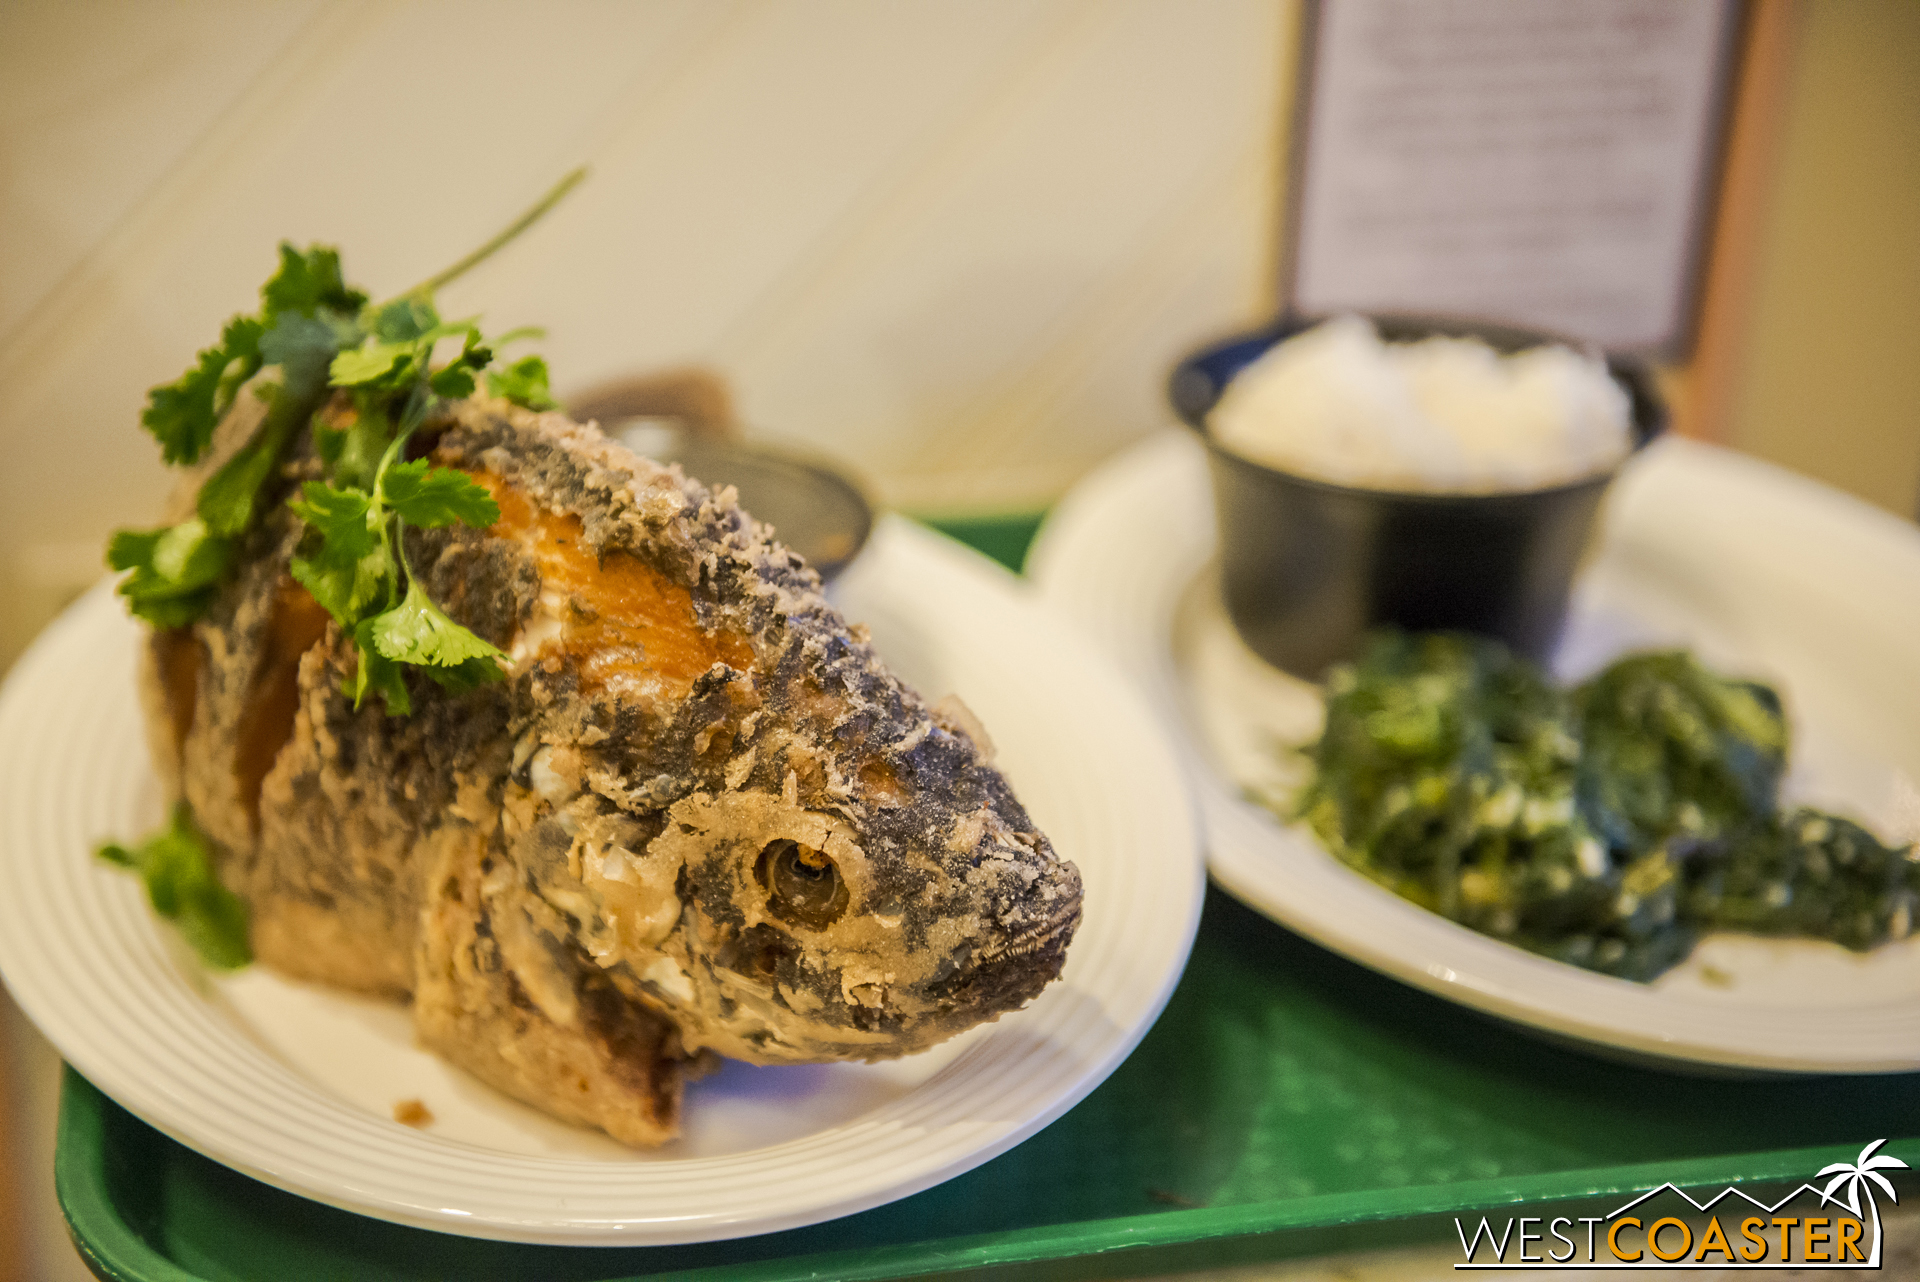  The Fried Tilapia is done in a traditional Vietnamese style.&nbsp; This was the one dish no one in my group ordered, but it certainly looked delicious and fairly popular!&nbsp; It came with soup, white rice, and Chinese water spinach (ong choy or to